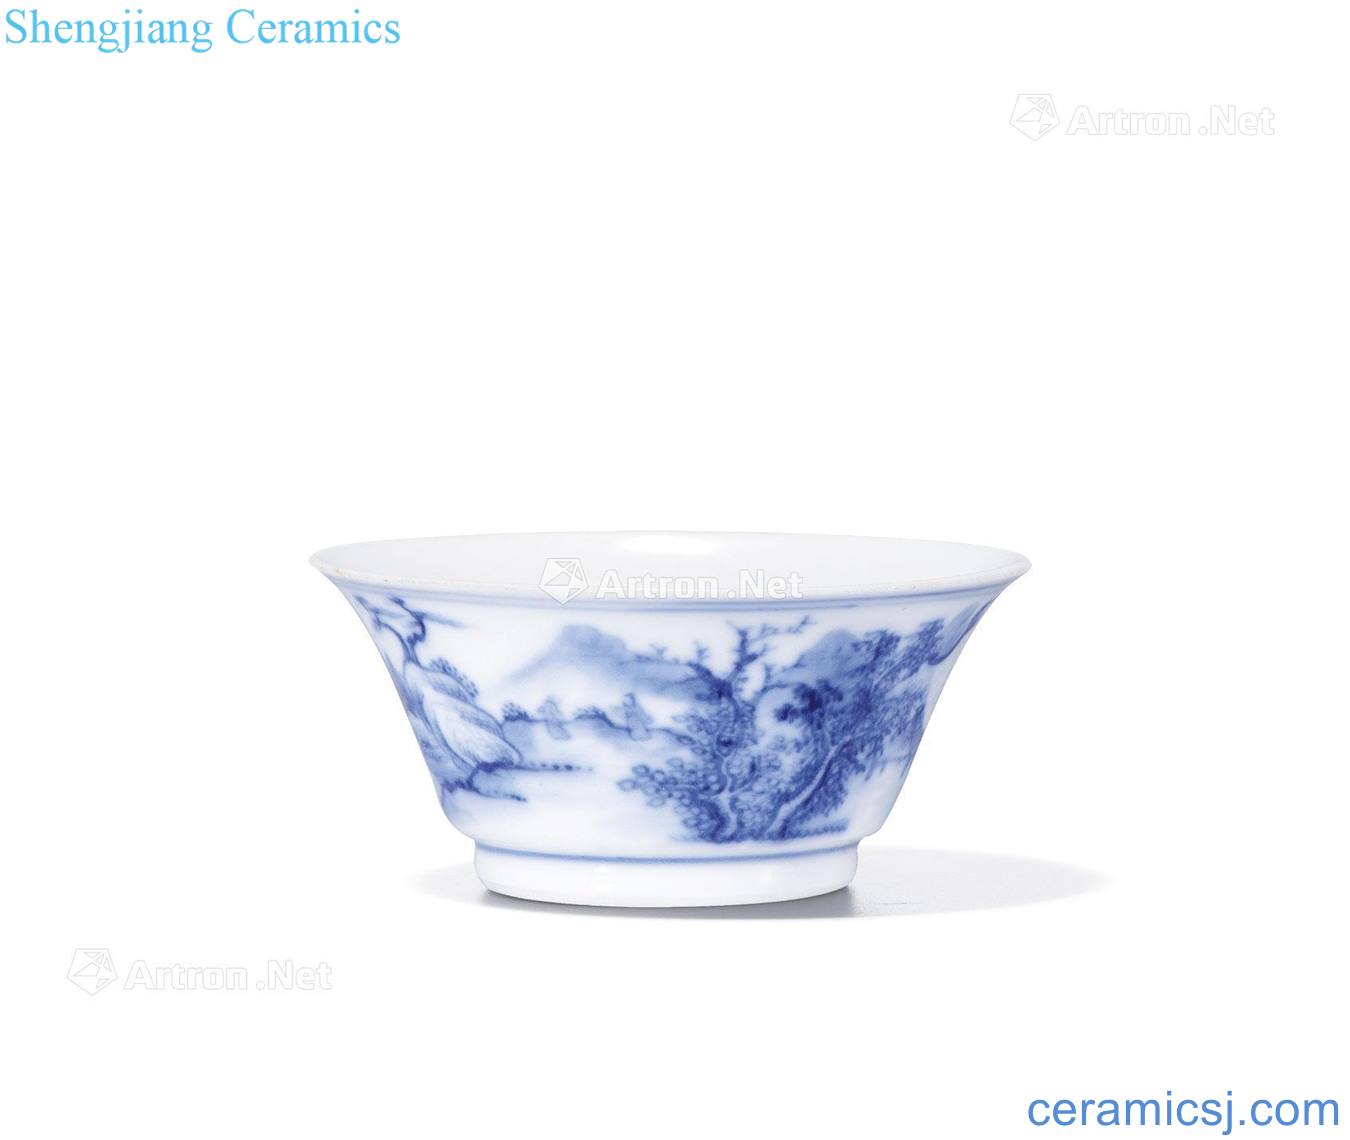 The qing emperor kangxi Blue and white landscape character lines